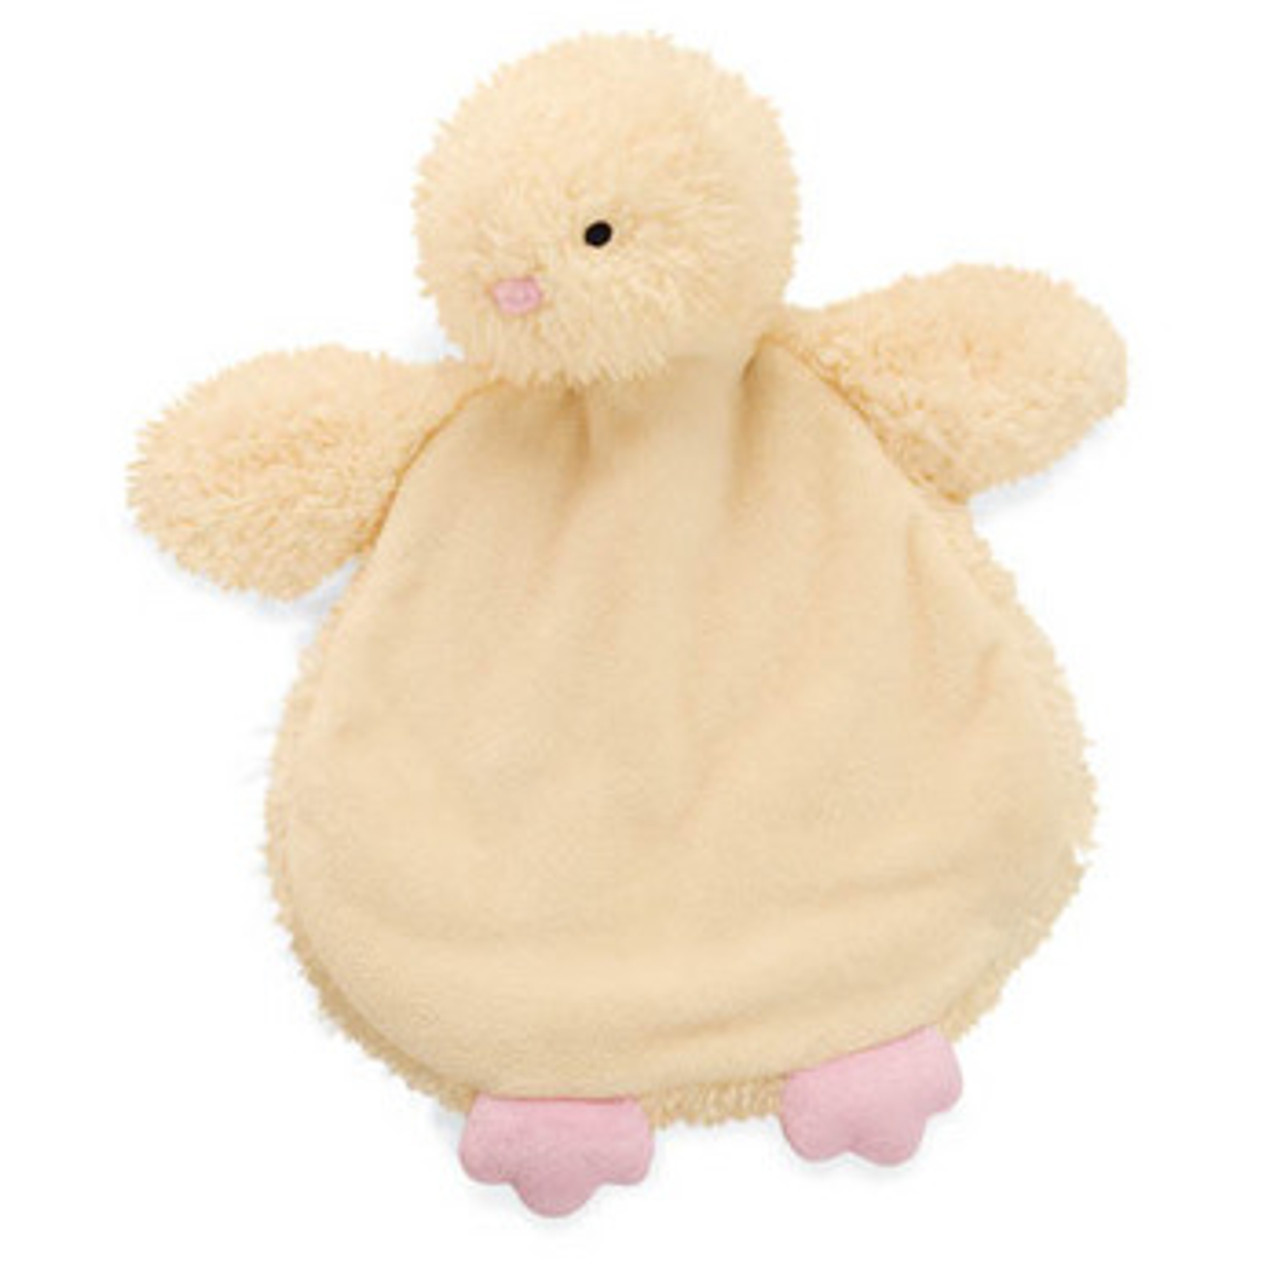 Big Fat Chick Cozies -2 Pack